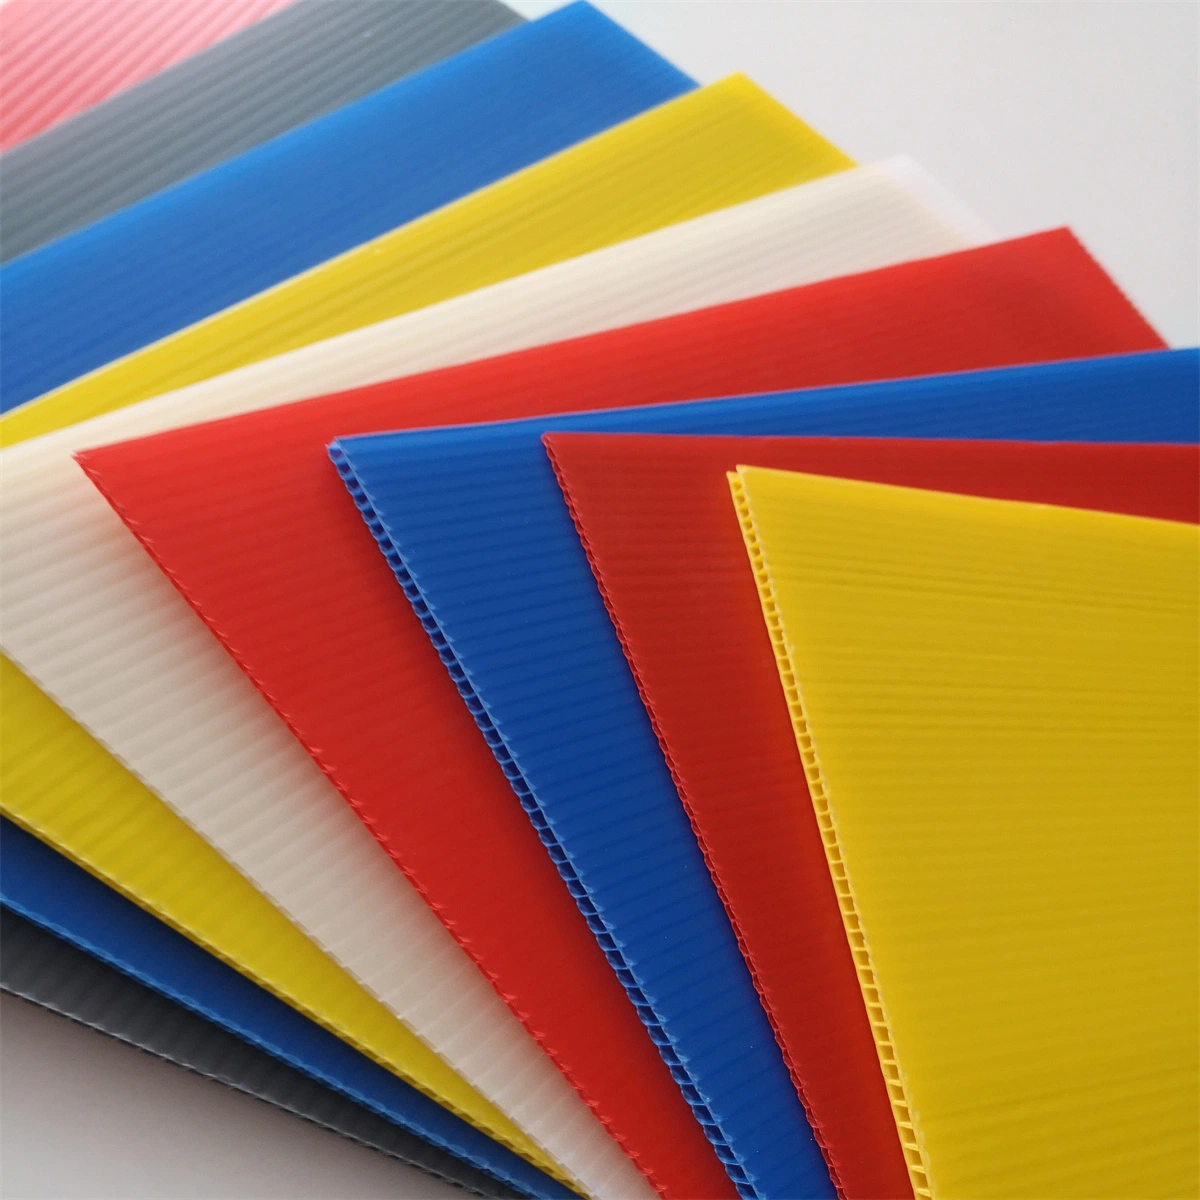 Most Popular Colorful Waterproof PP Correx Corrugated Plastic Corfulte Hollow Sheet for Printing, Package and Protection